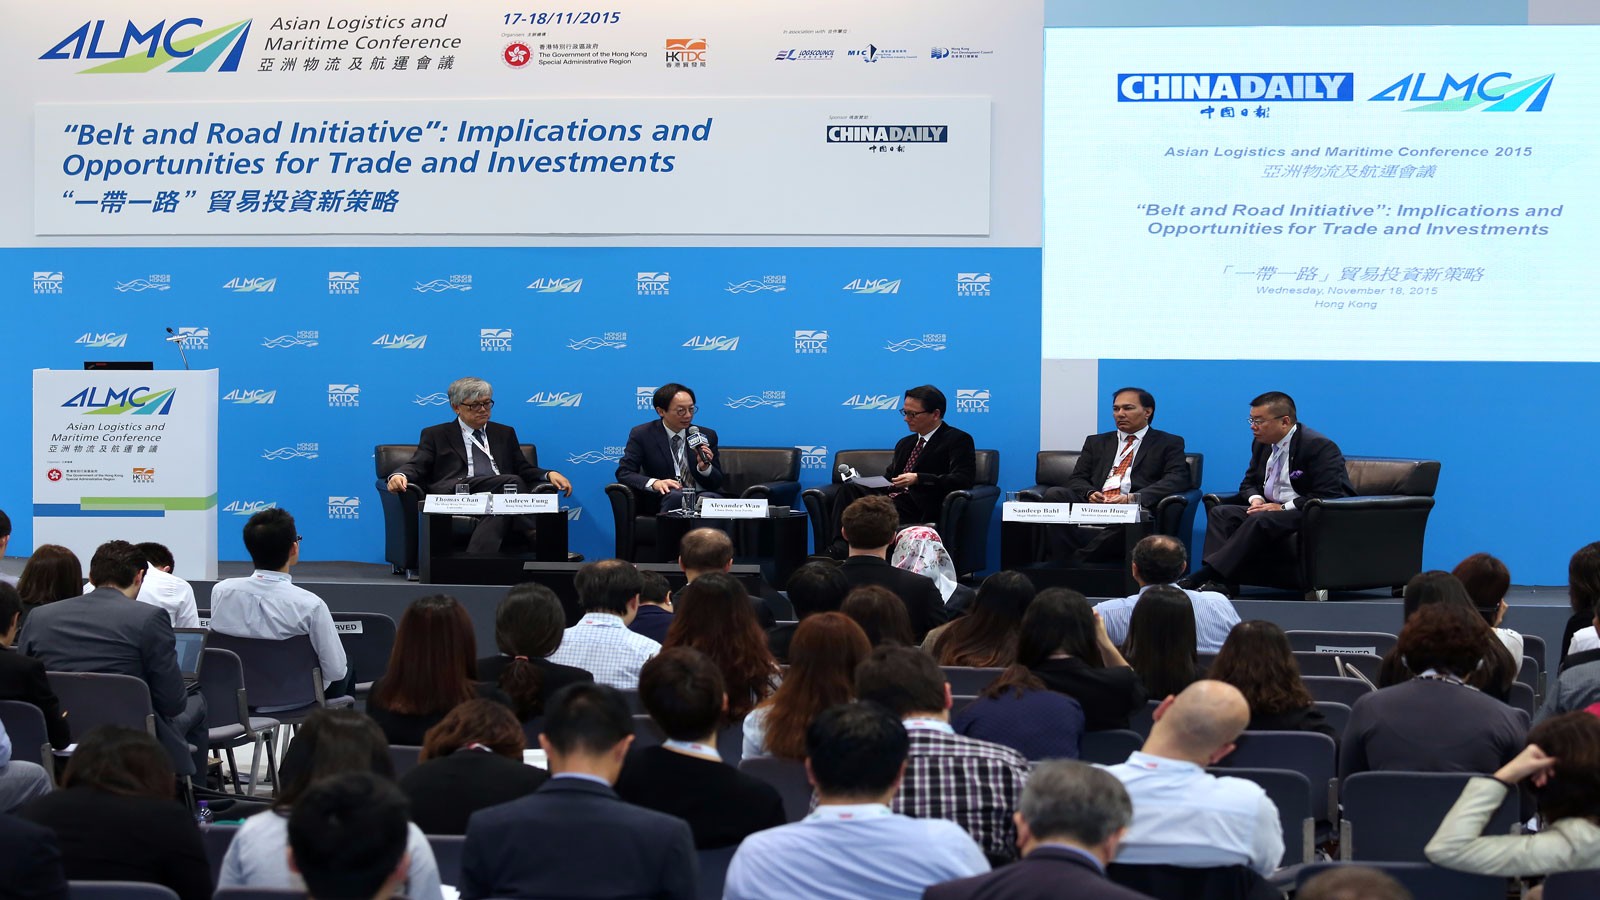 China Daily Co-branded session at Asian Logistics and Maritime Conference on 18 Nov, 2015 (CHN)